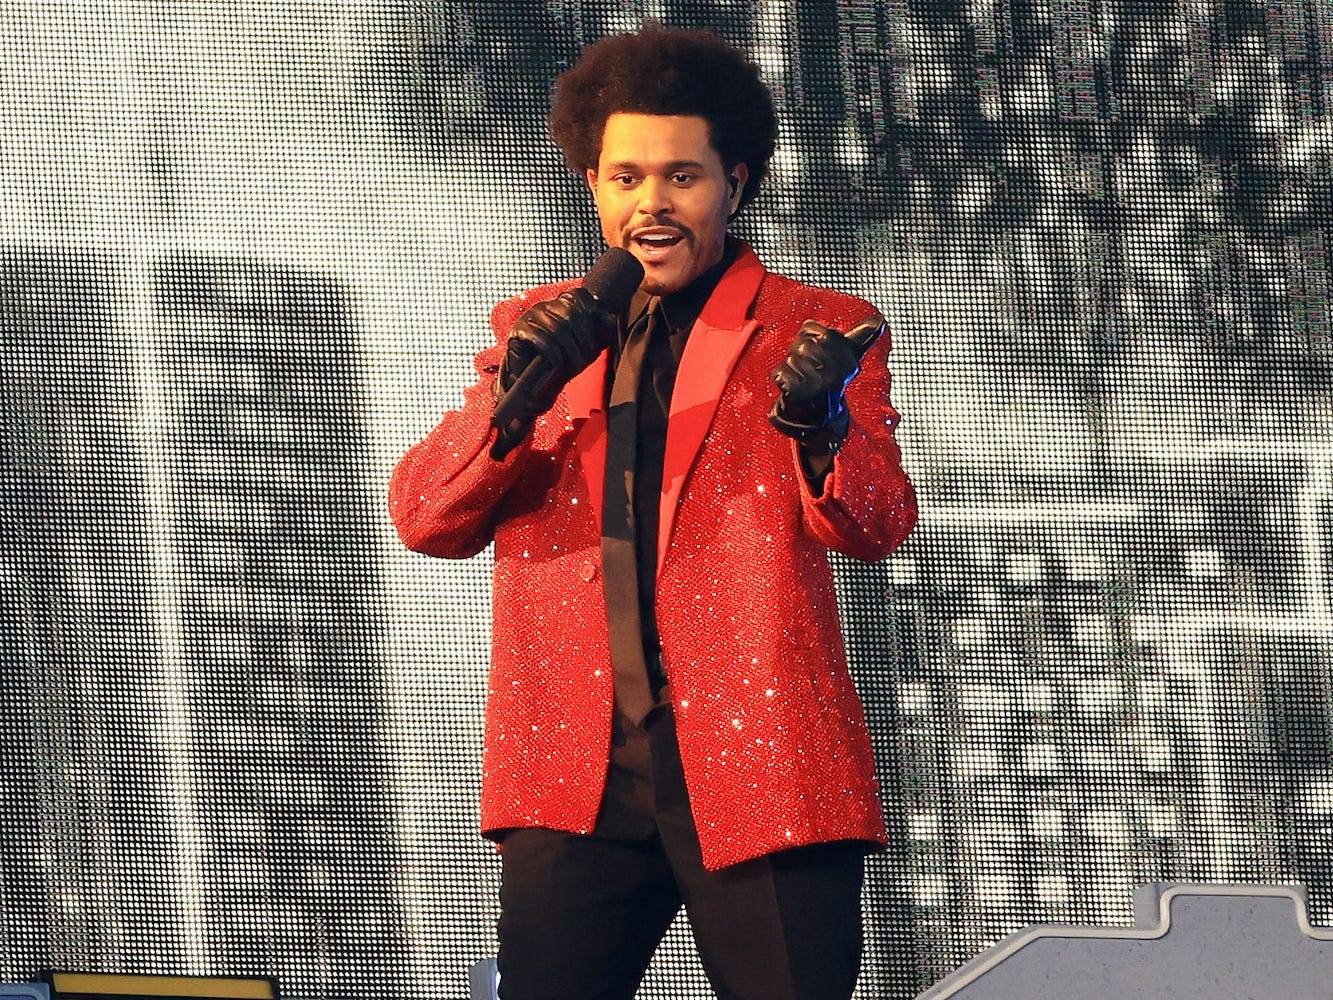 The Weeknd Wore Creeper Shoes for His Halftime Performance at the Super Bowl